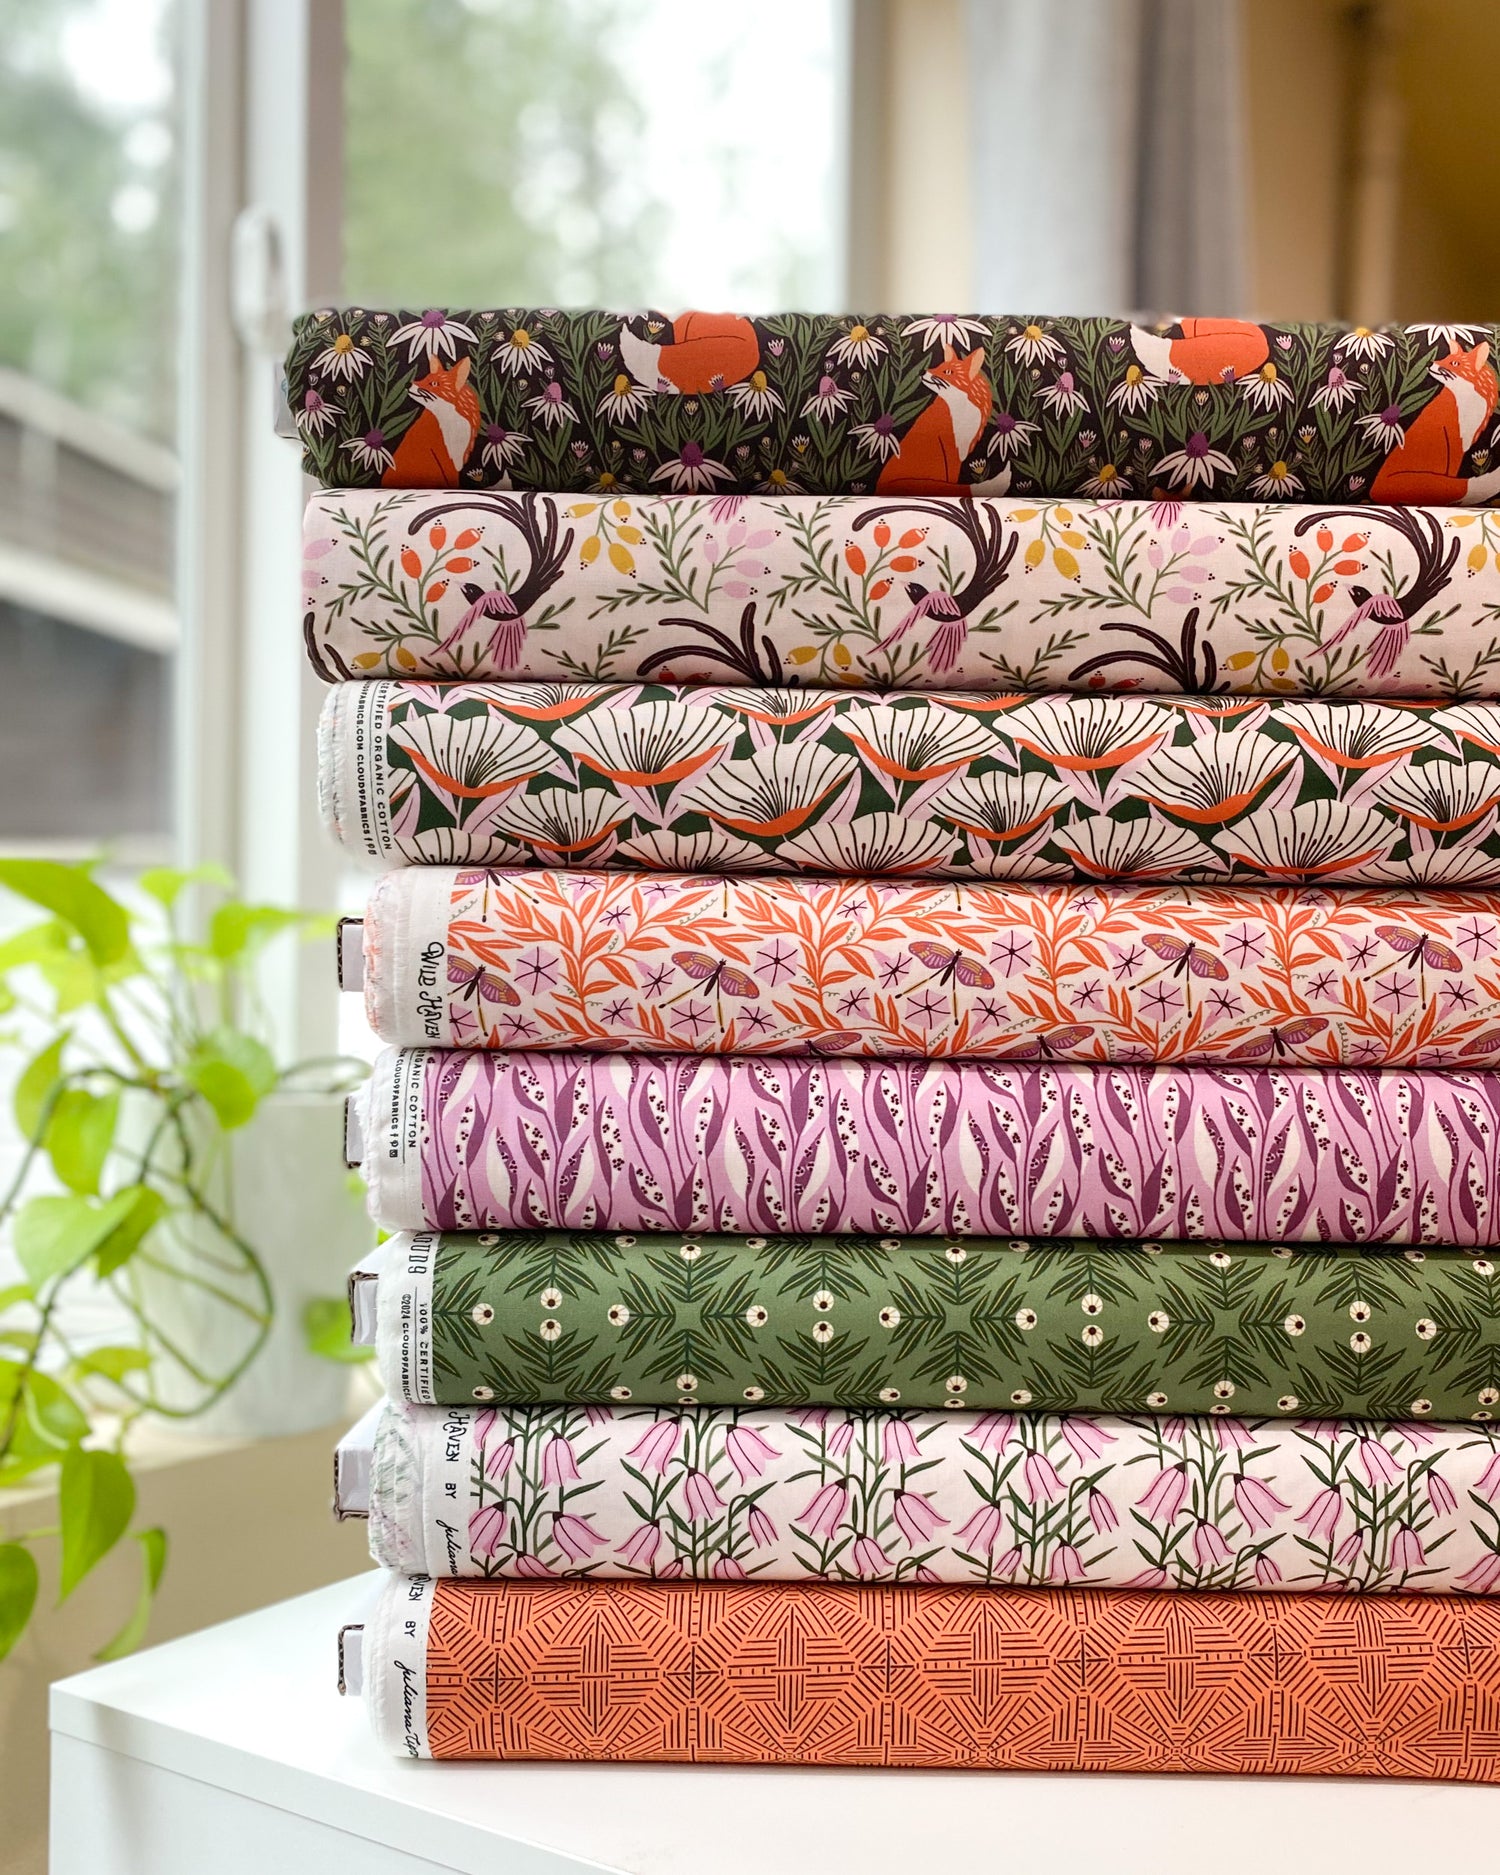 Wild Haven fabric collection by Juliana Tipton for Cloud 9 Fabrics